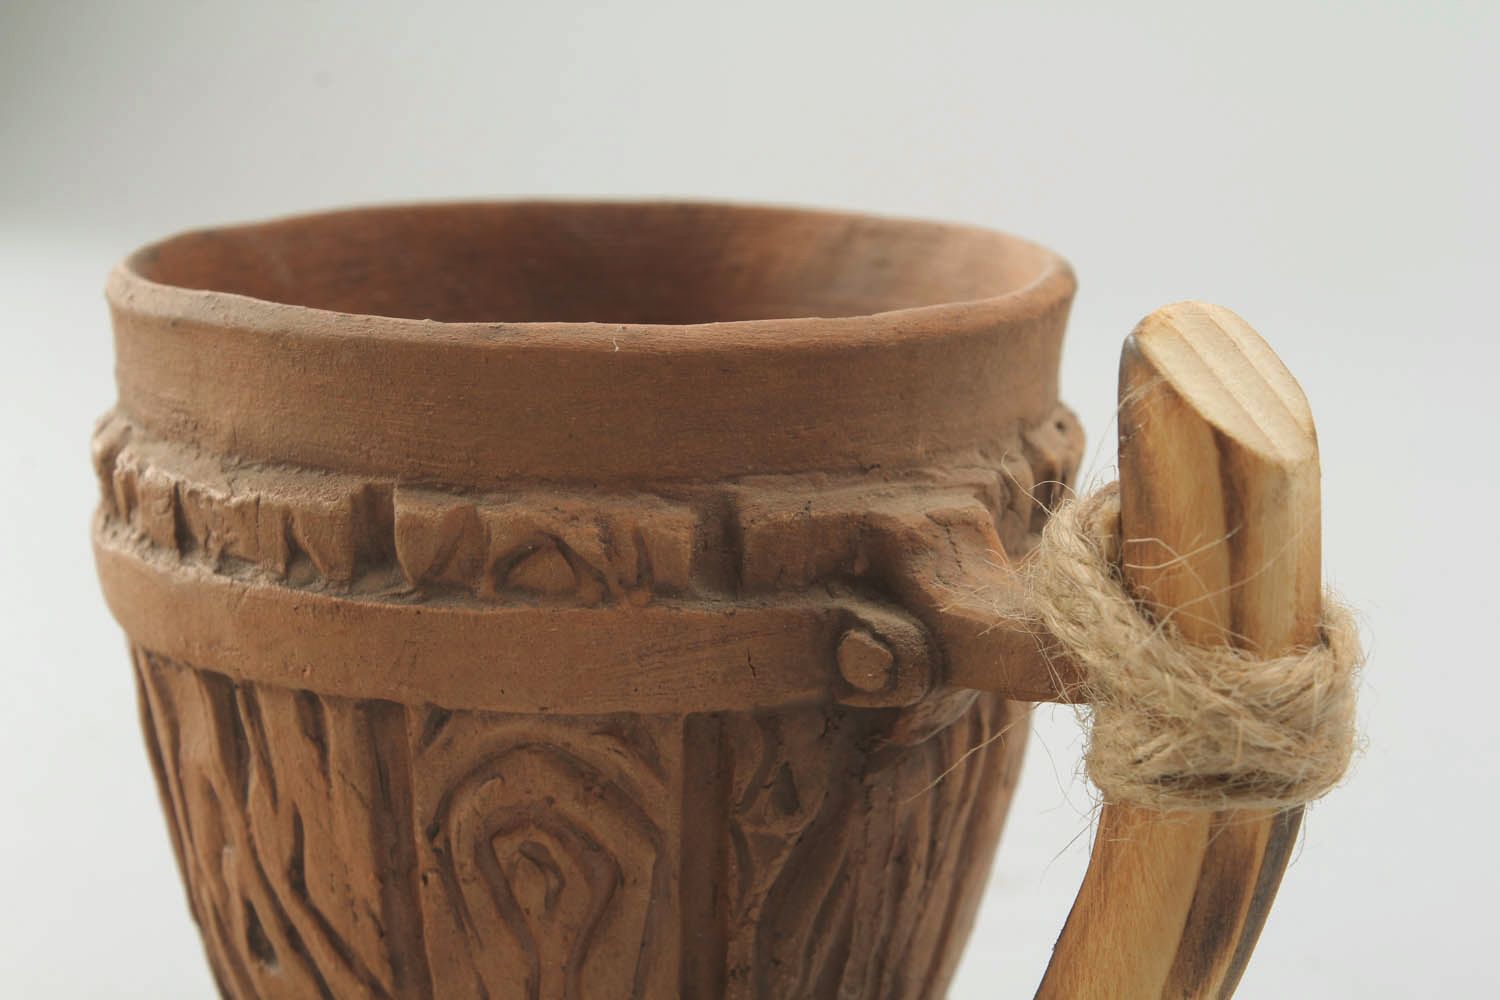 Clay not glazed lead-free cup with fake wood pattern and wide handle  photo 4